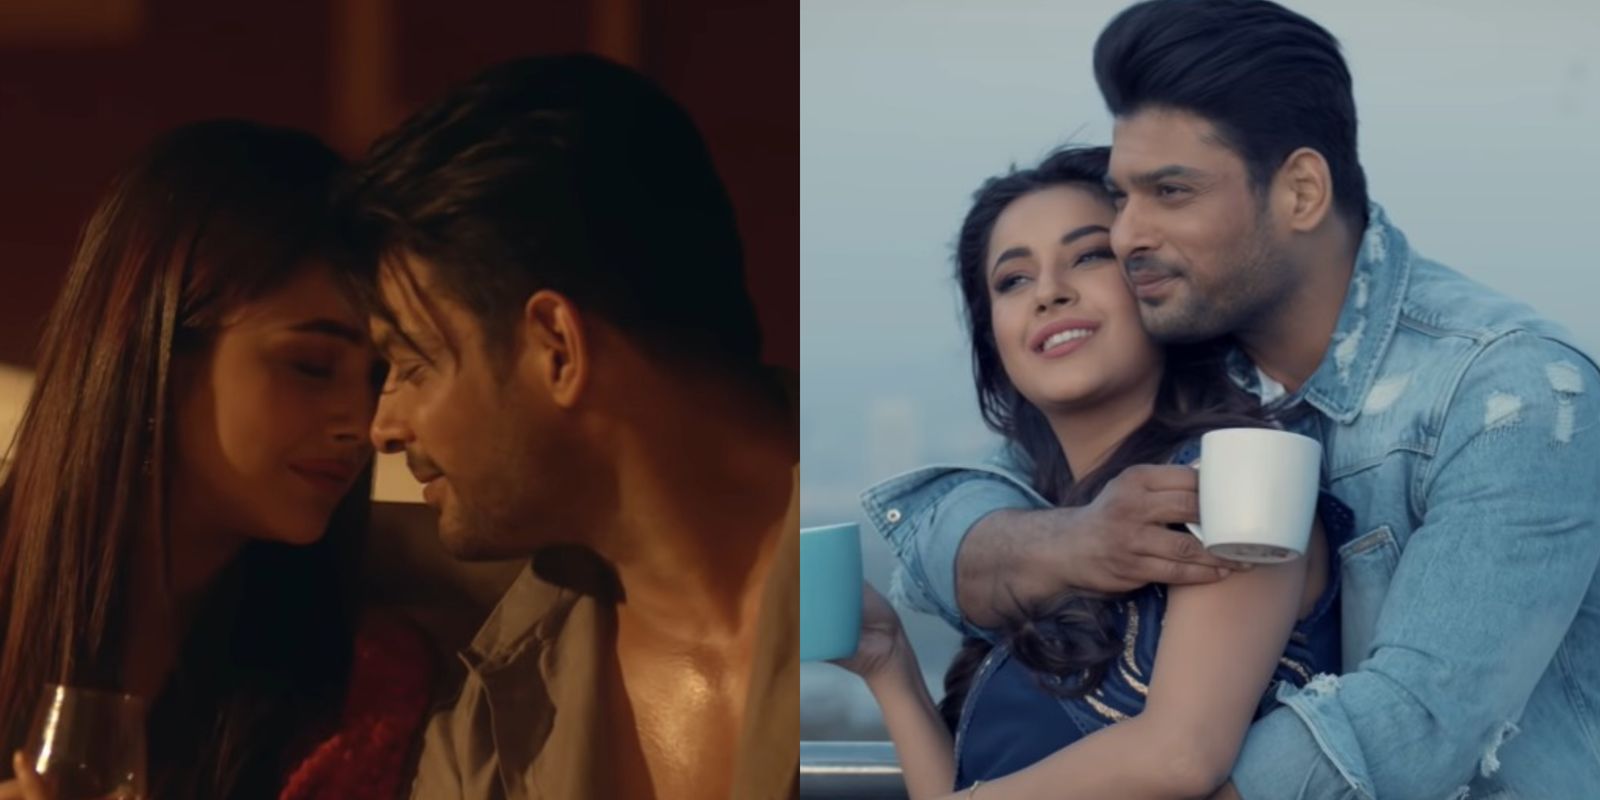 Bhula Dunga Music Video: Shehnaaz Gill And Sidharth Shukla’s Undeniable Chemistry Will Leave You Wanting More; Watch